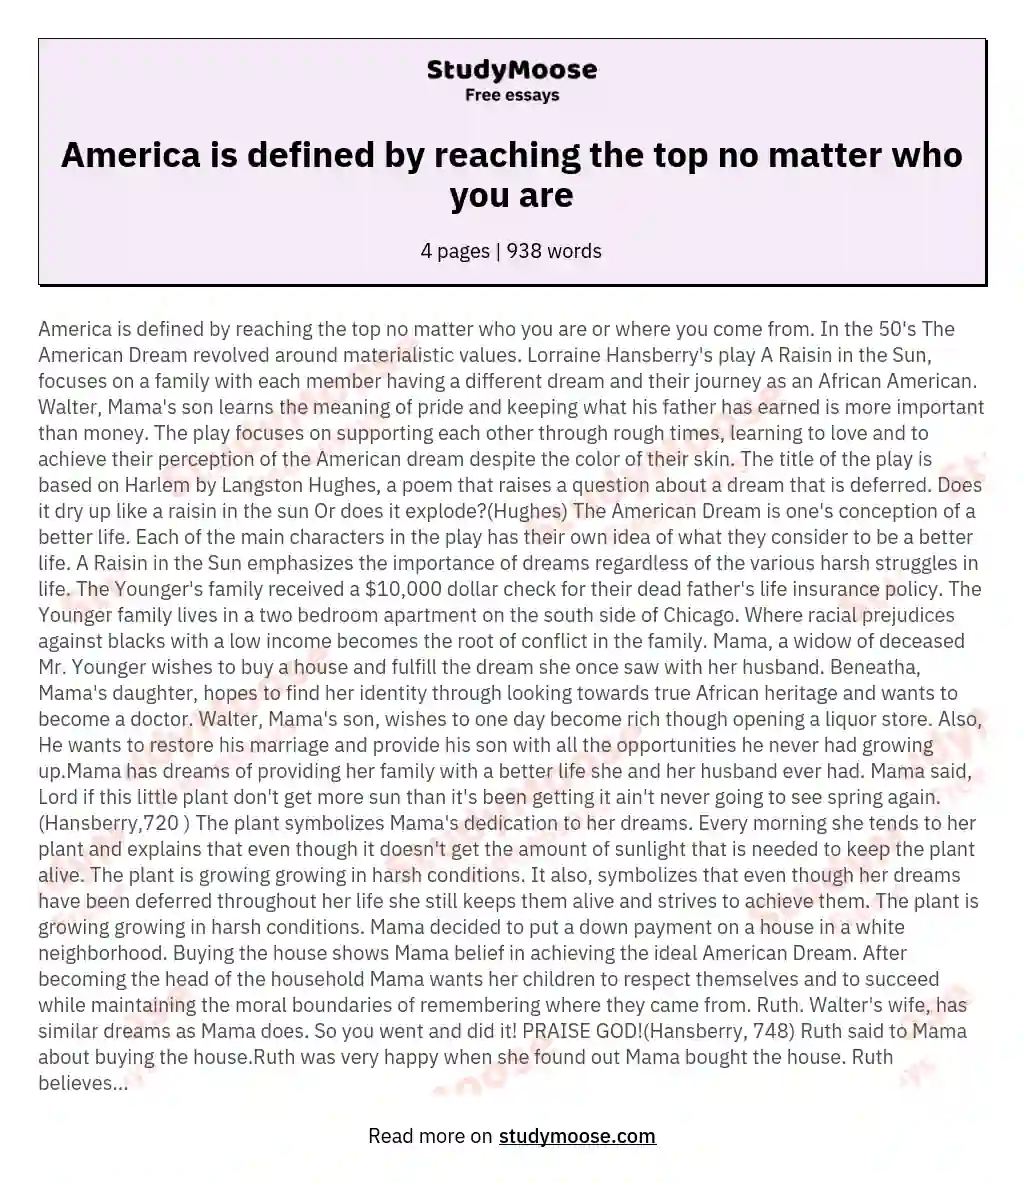 America is defined by reaching the top no matter who you are essay